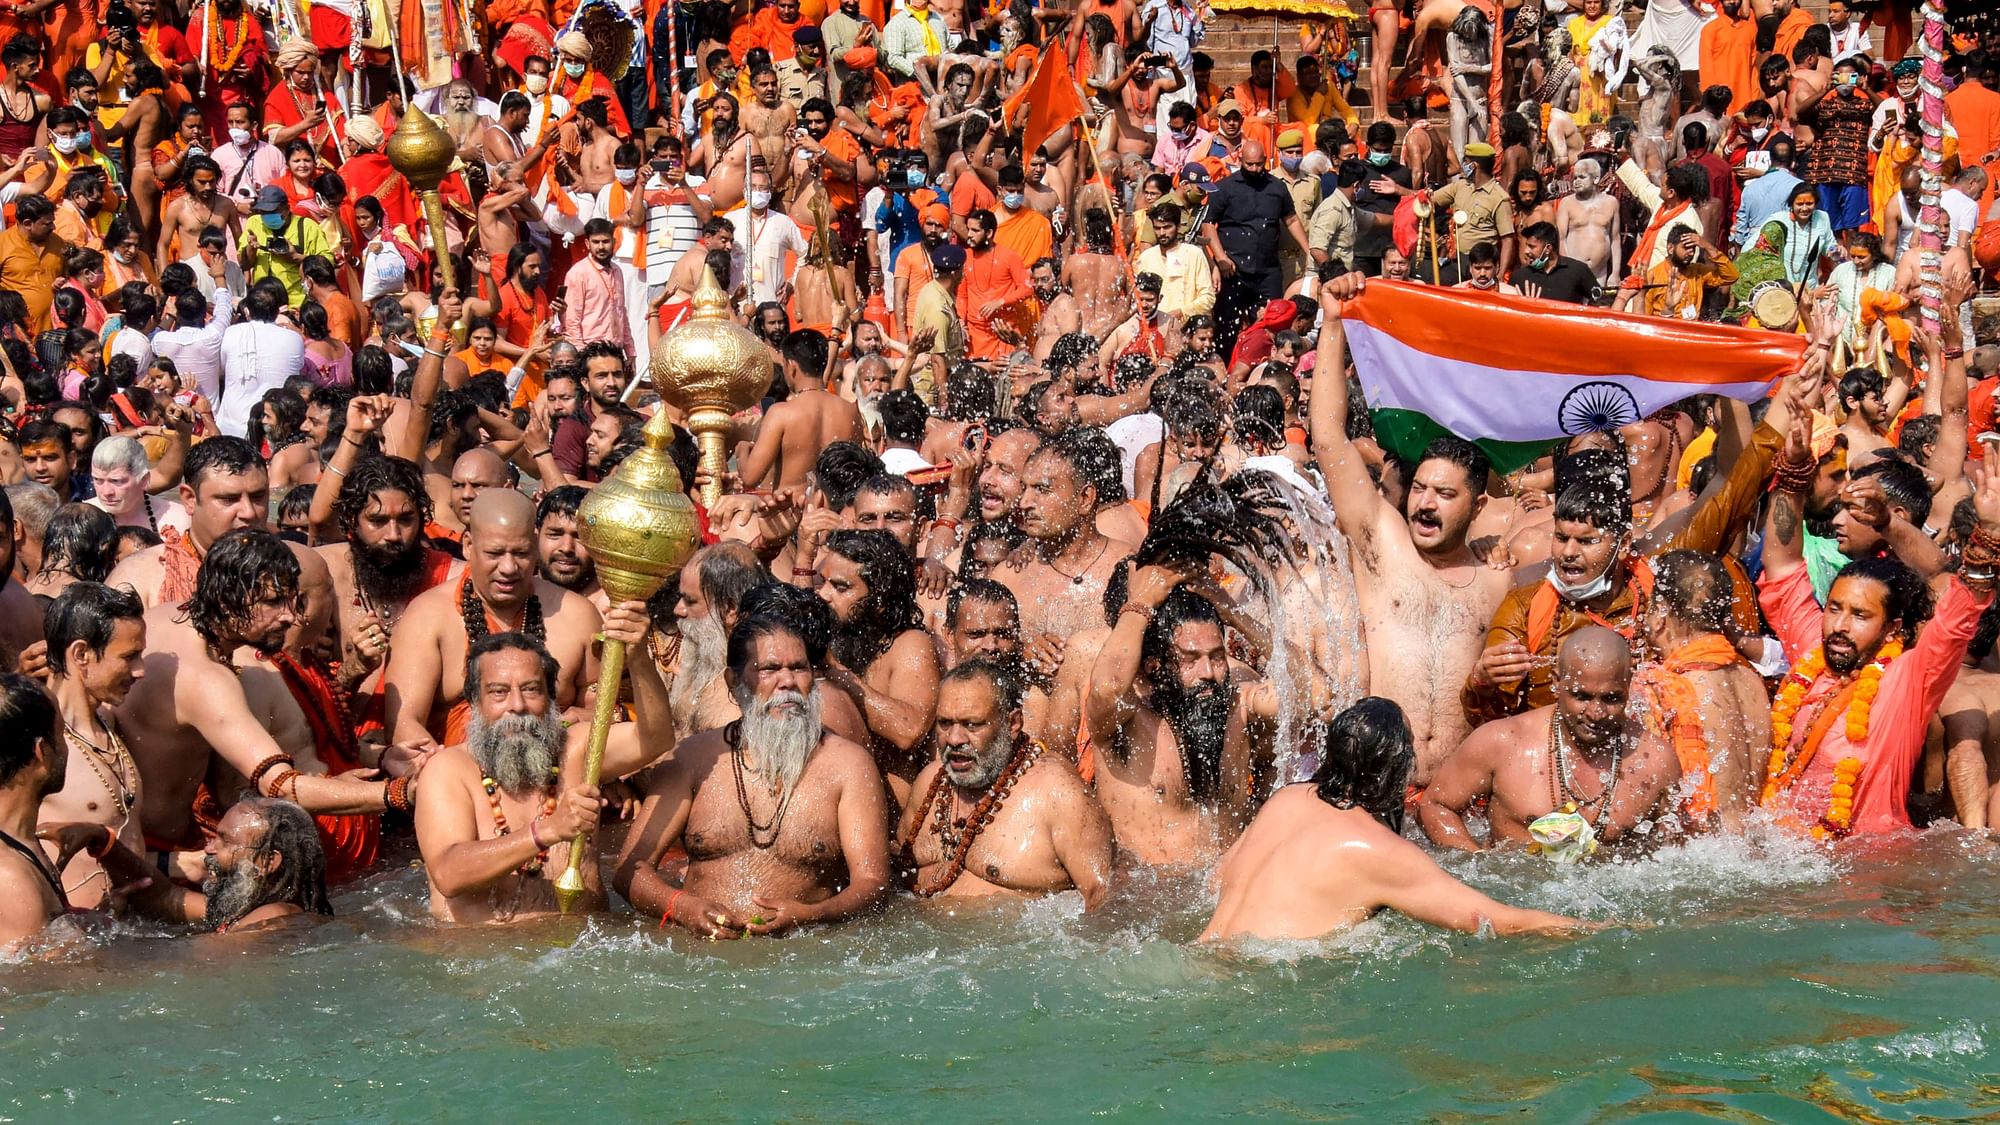 Kumbh Mela may have turned into a super spreader event as Uttarakhand had recorded a spike in COVID-19 cases.